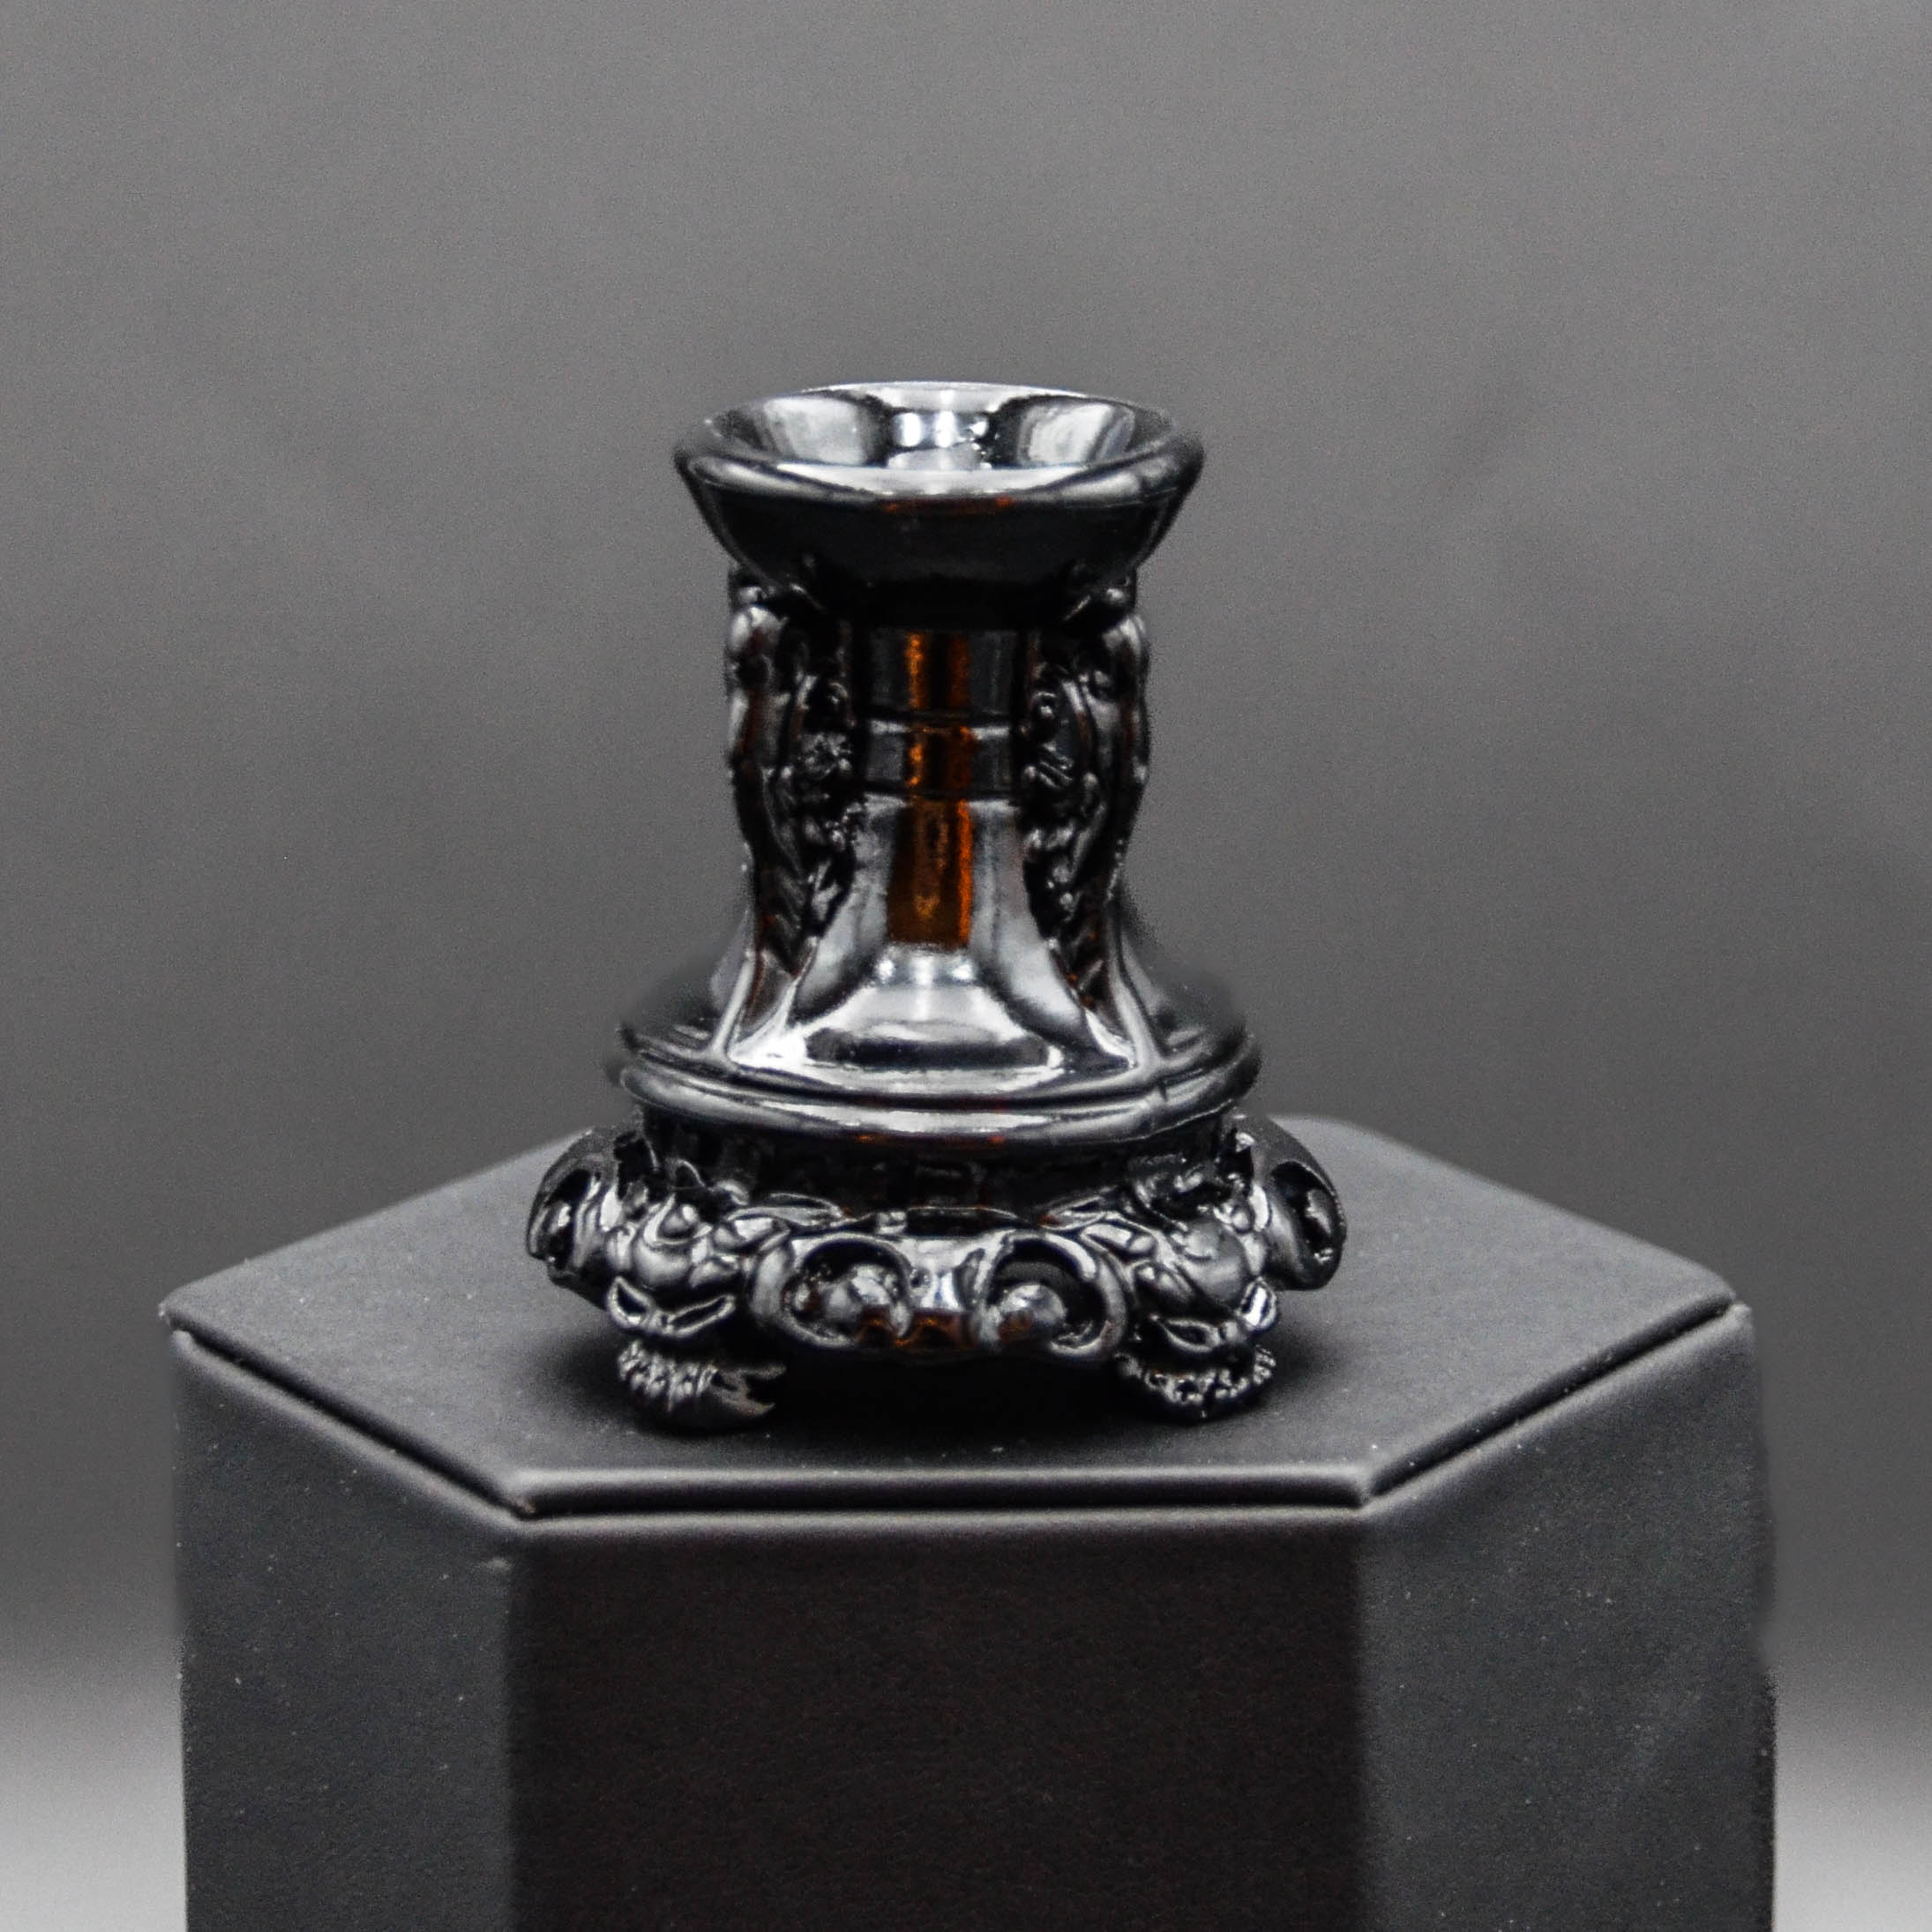 Black resin stand that will accommodate small to medium size spheres/balls.